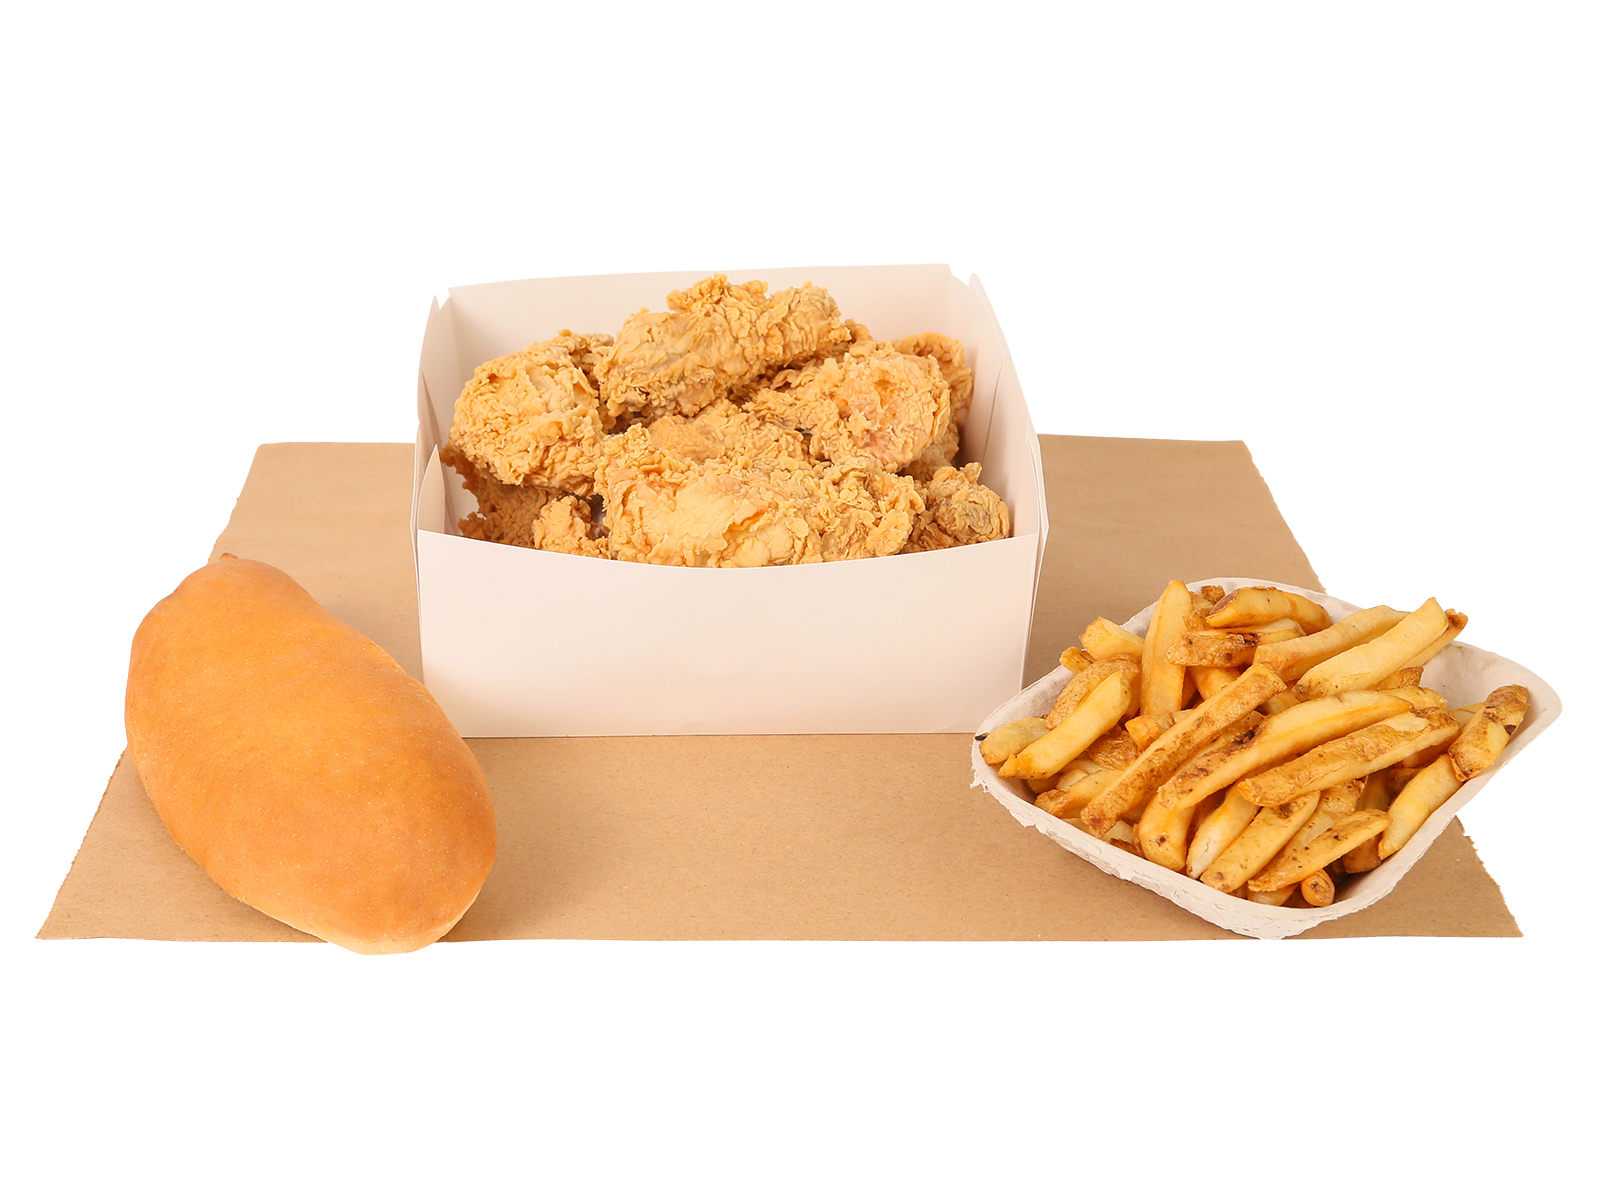 10 PC. Our Choice Fried Chicken Family Order served with french fries & french loaf